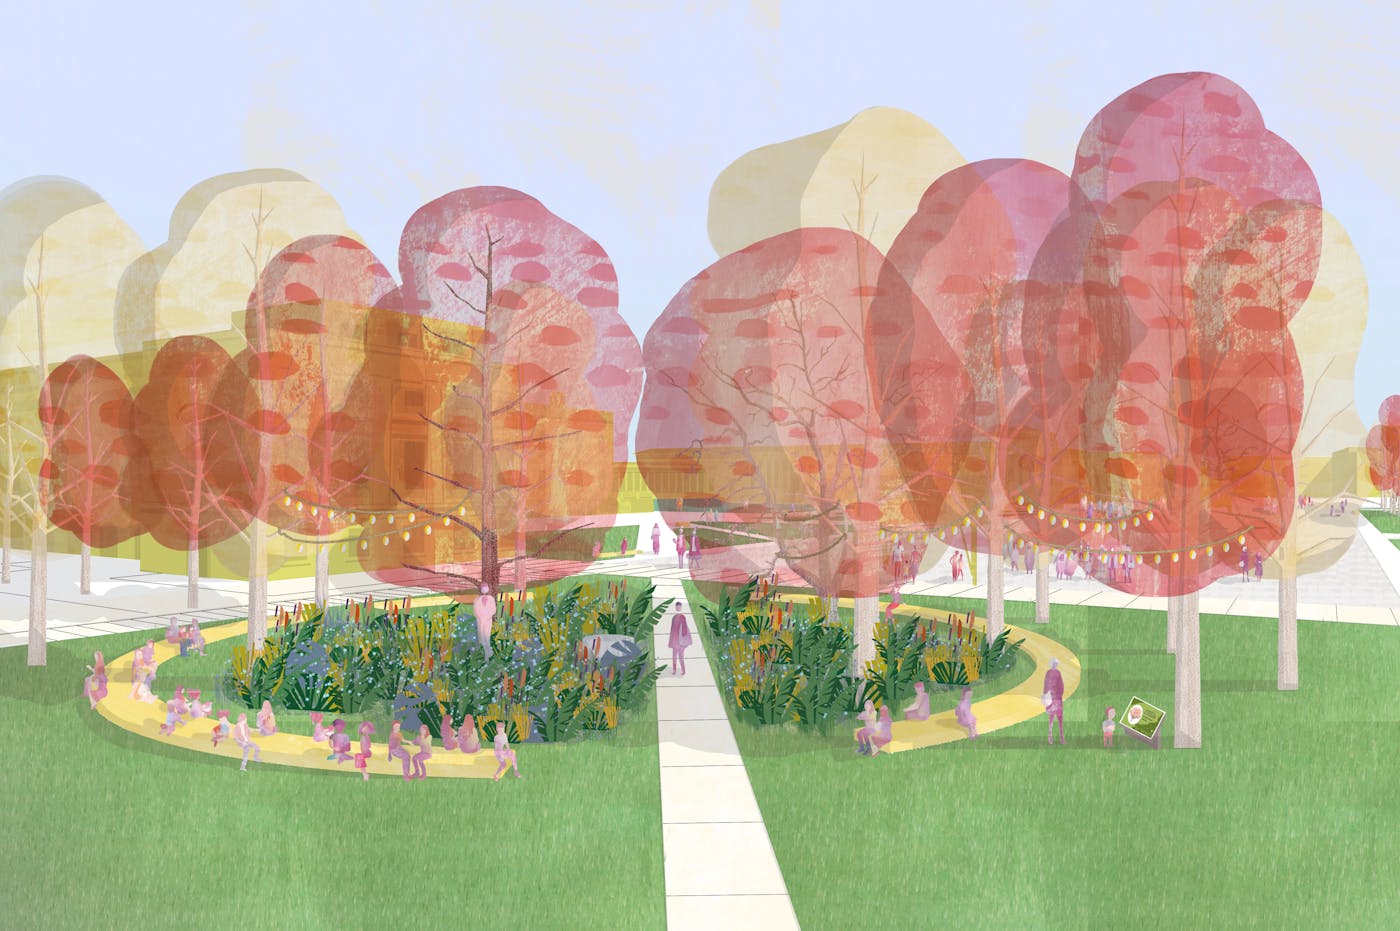 Illustration of the site at Royal Museums Greenwich